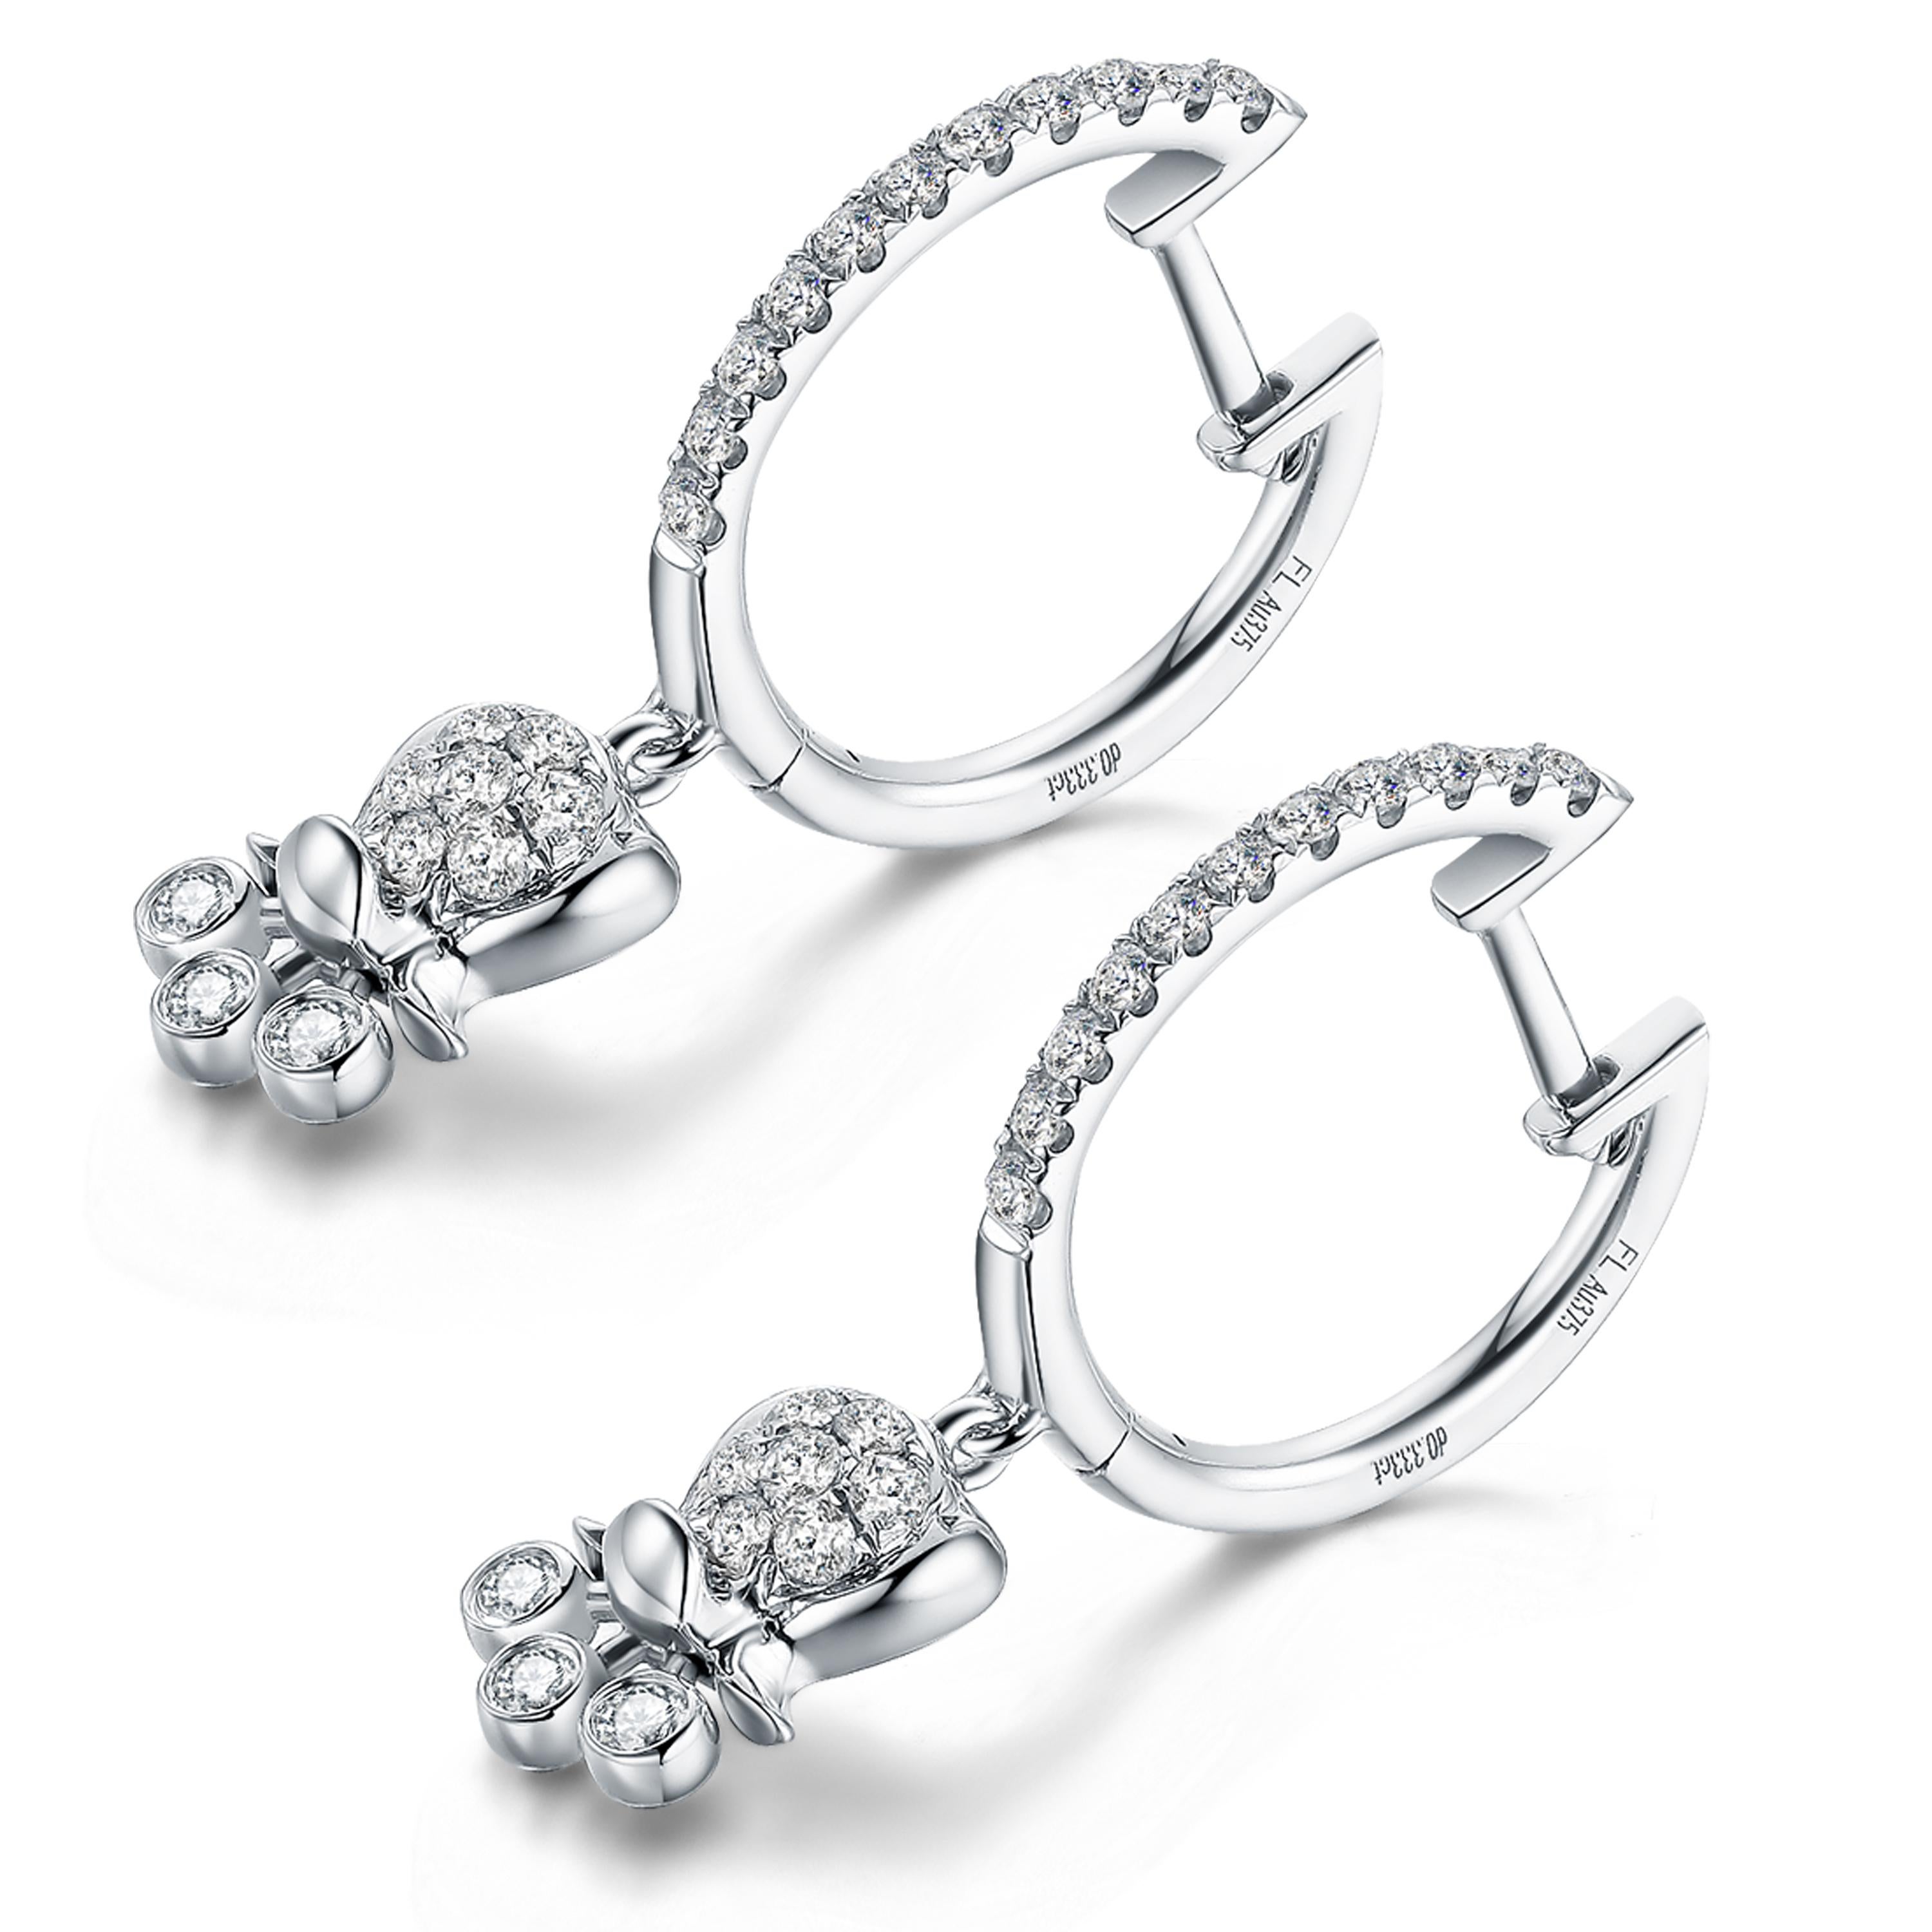 Description:
Lily of the Valley drop earrings with 0.333ct white diamonds, set in 9ct white gold with a high polish.

Inspiration:
The lily of the valley flower is one of the most beloved, opulent wedding flowers, which symbolises purity and